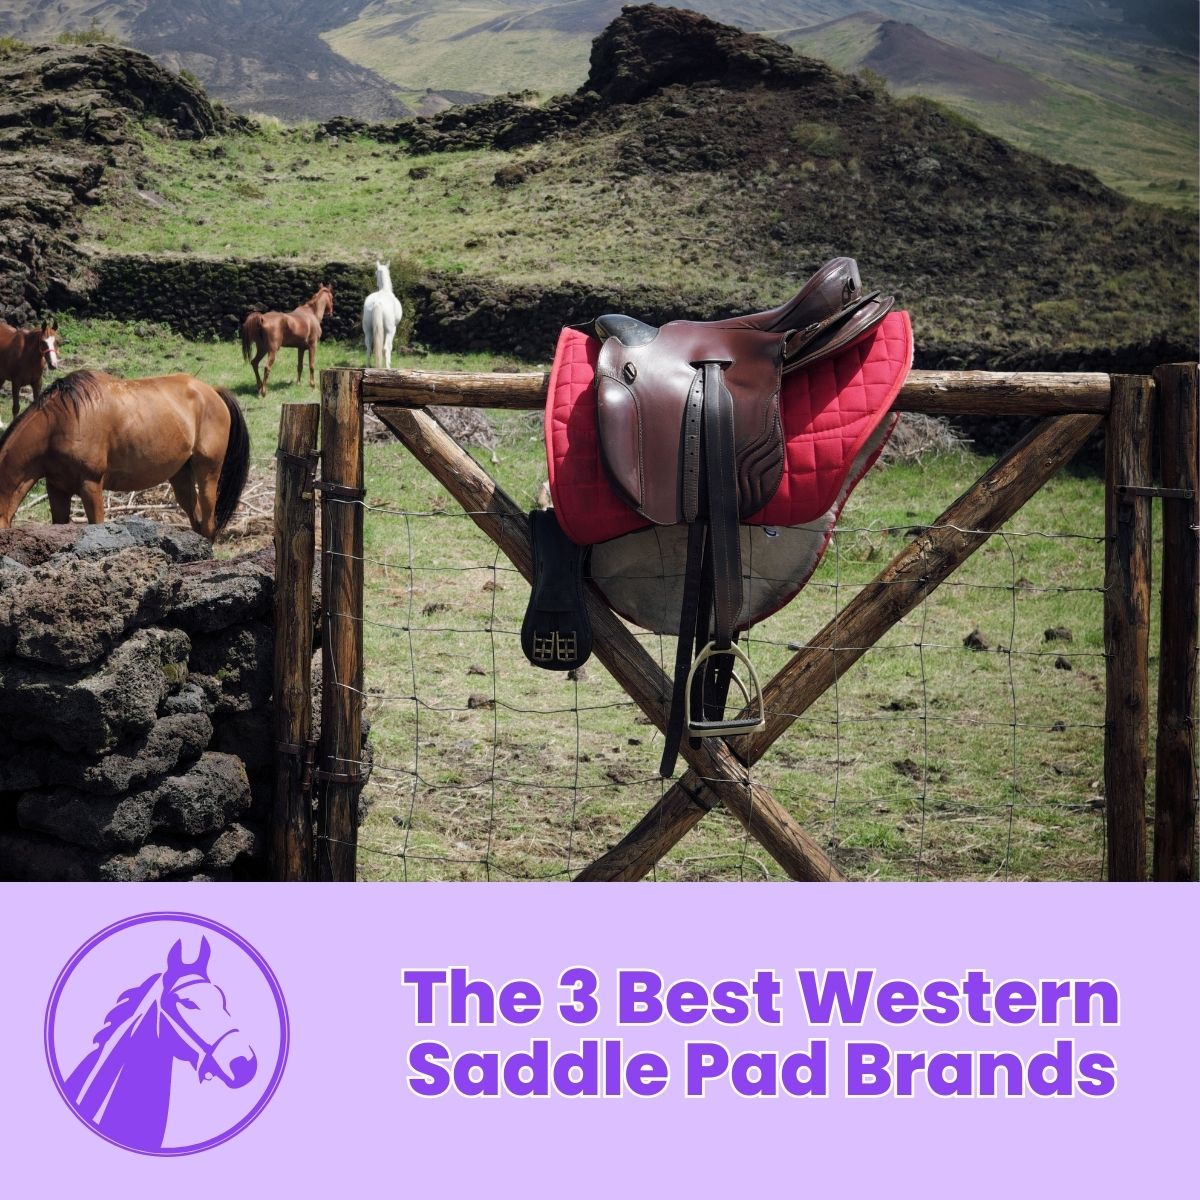 You are currently viewing The 3 Best Western Saddle Pad Brands